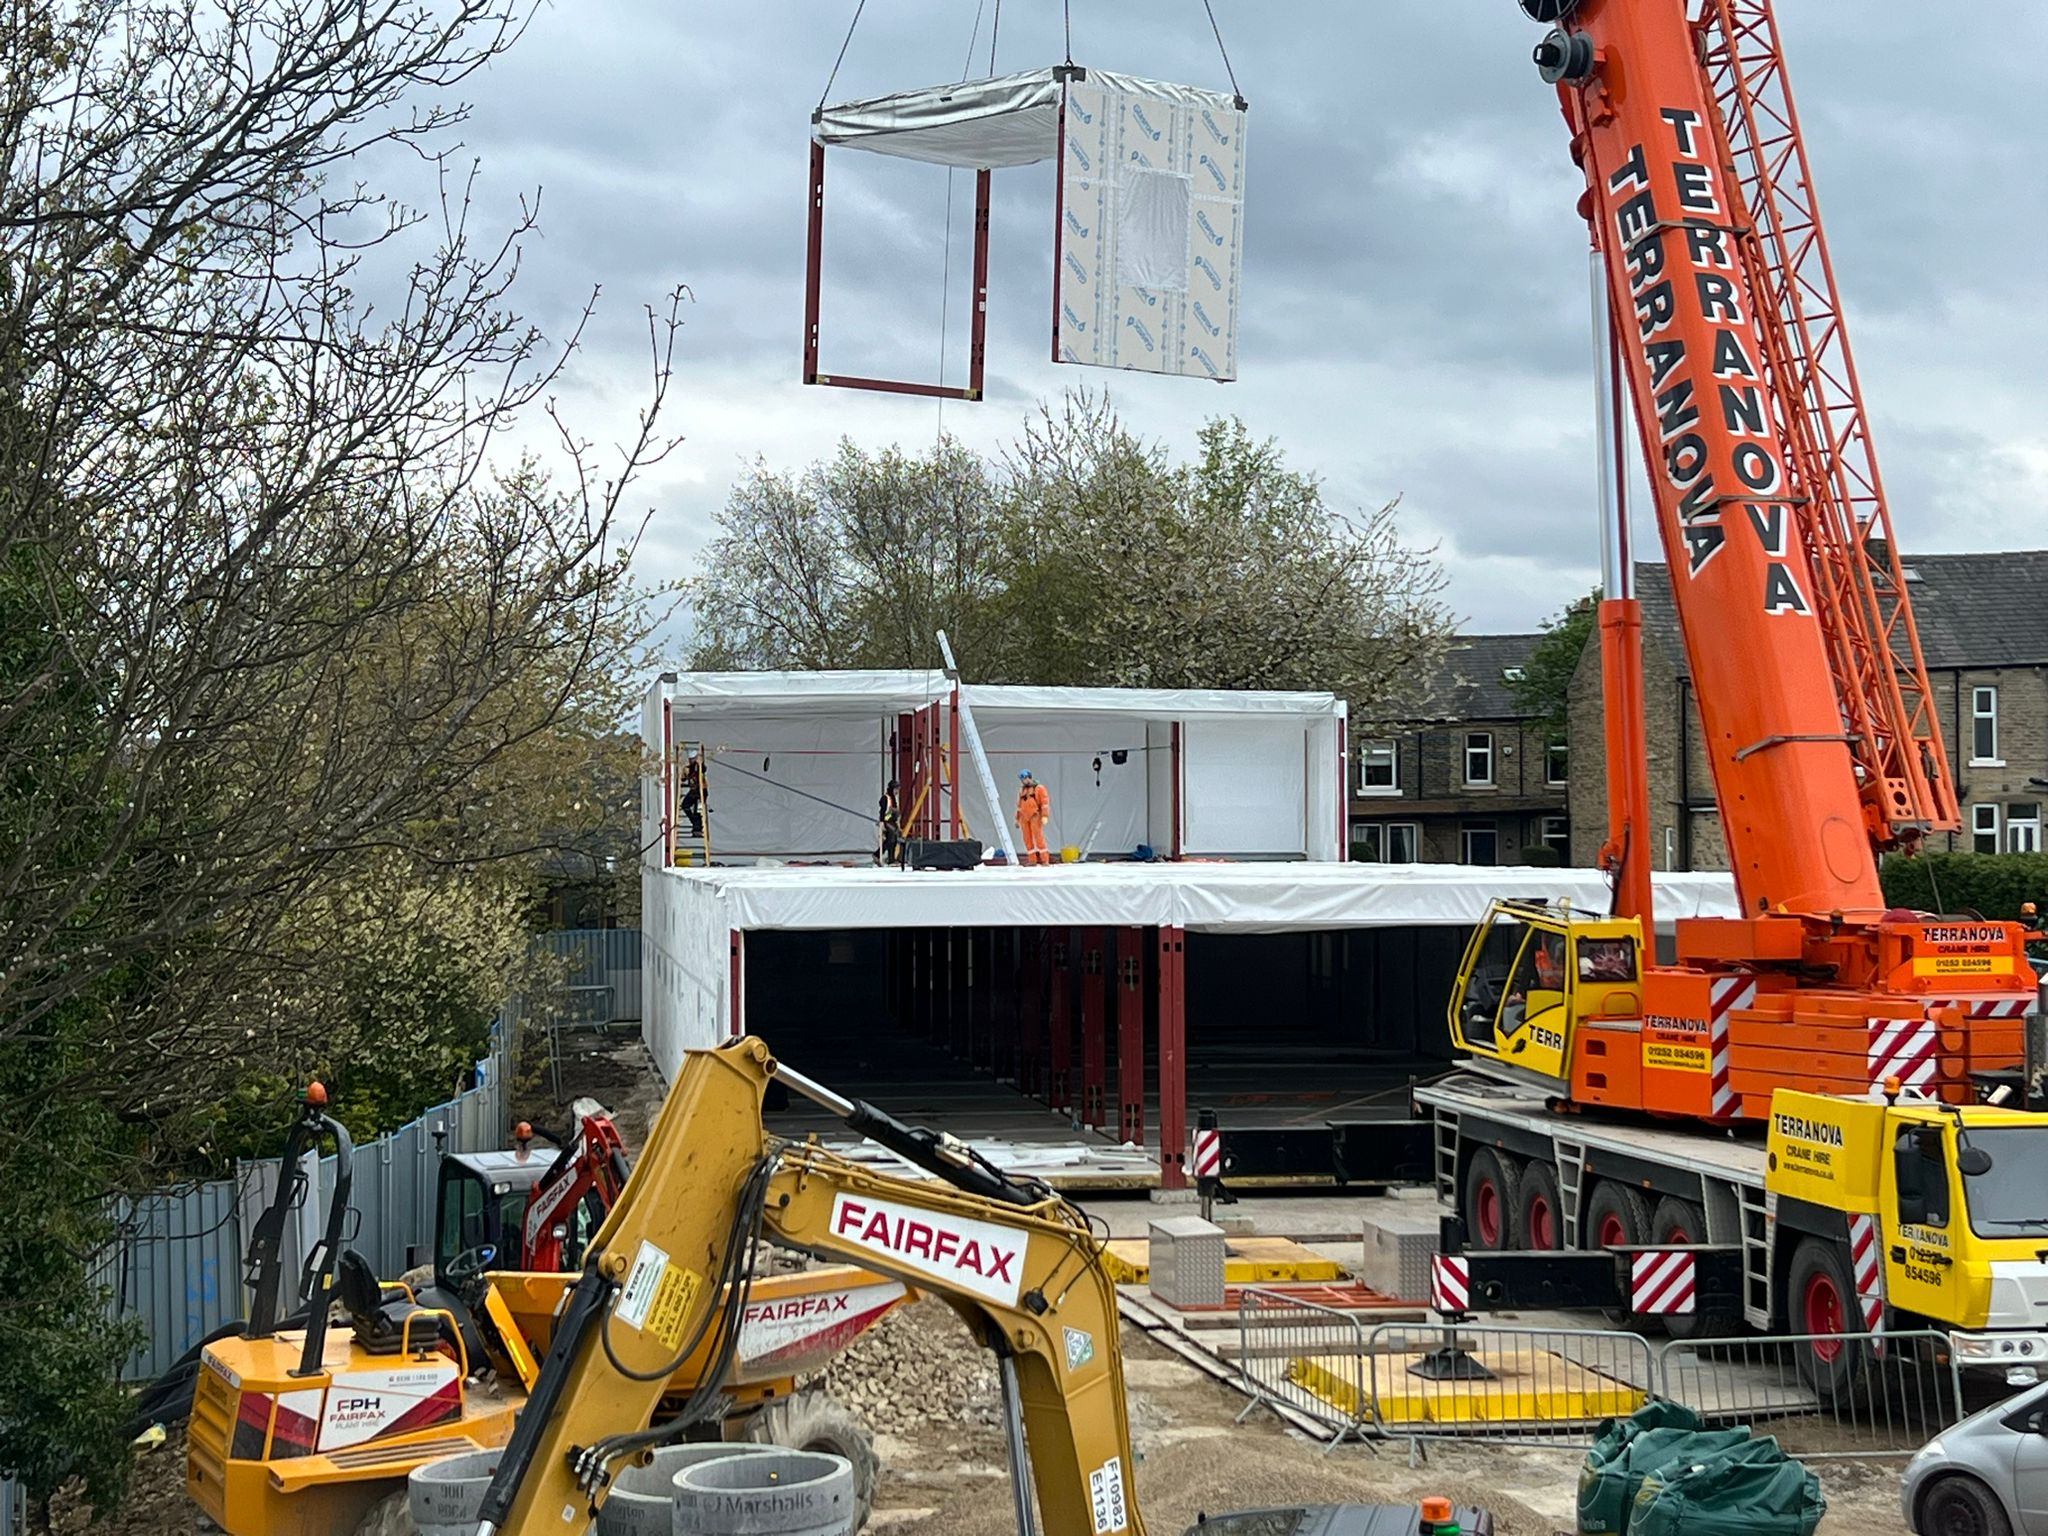 The learning and development centre is assembled by a large orange crane lifting modules into position